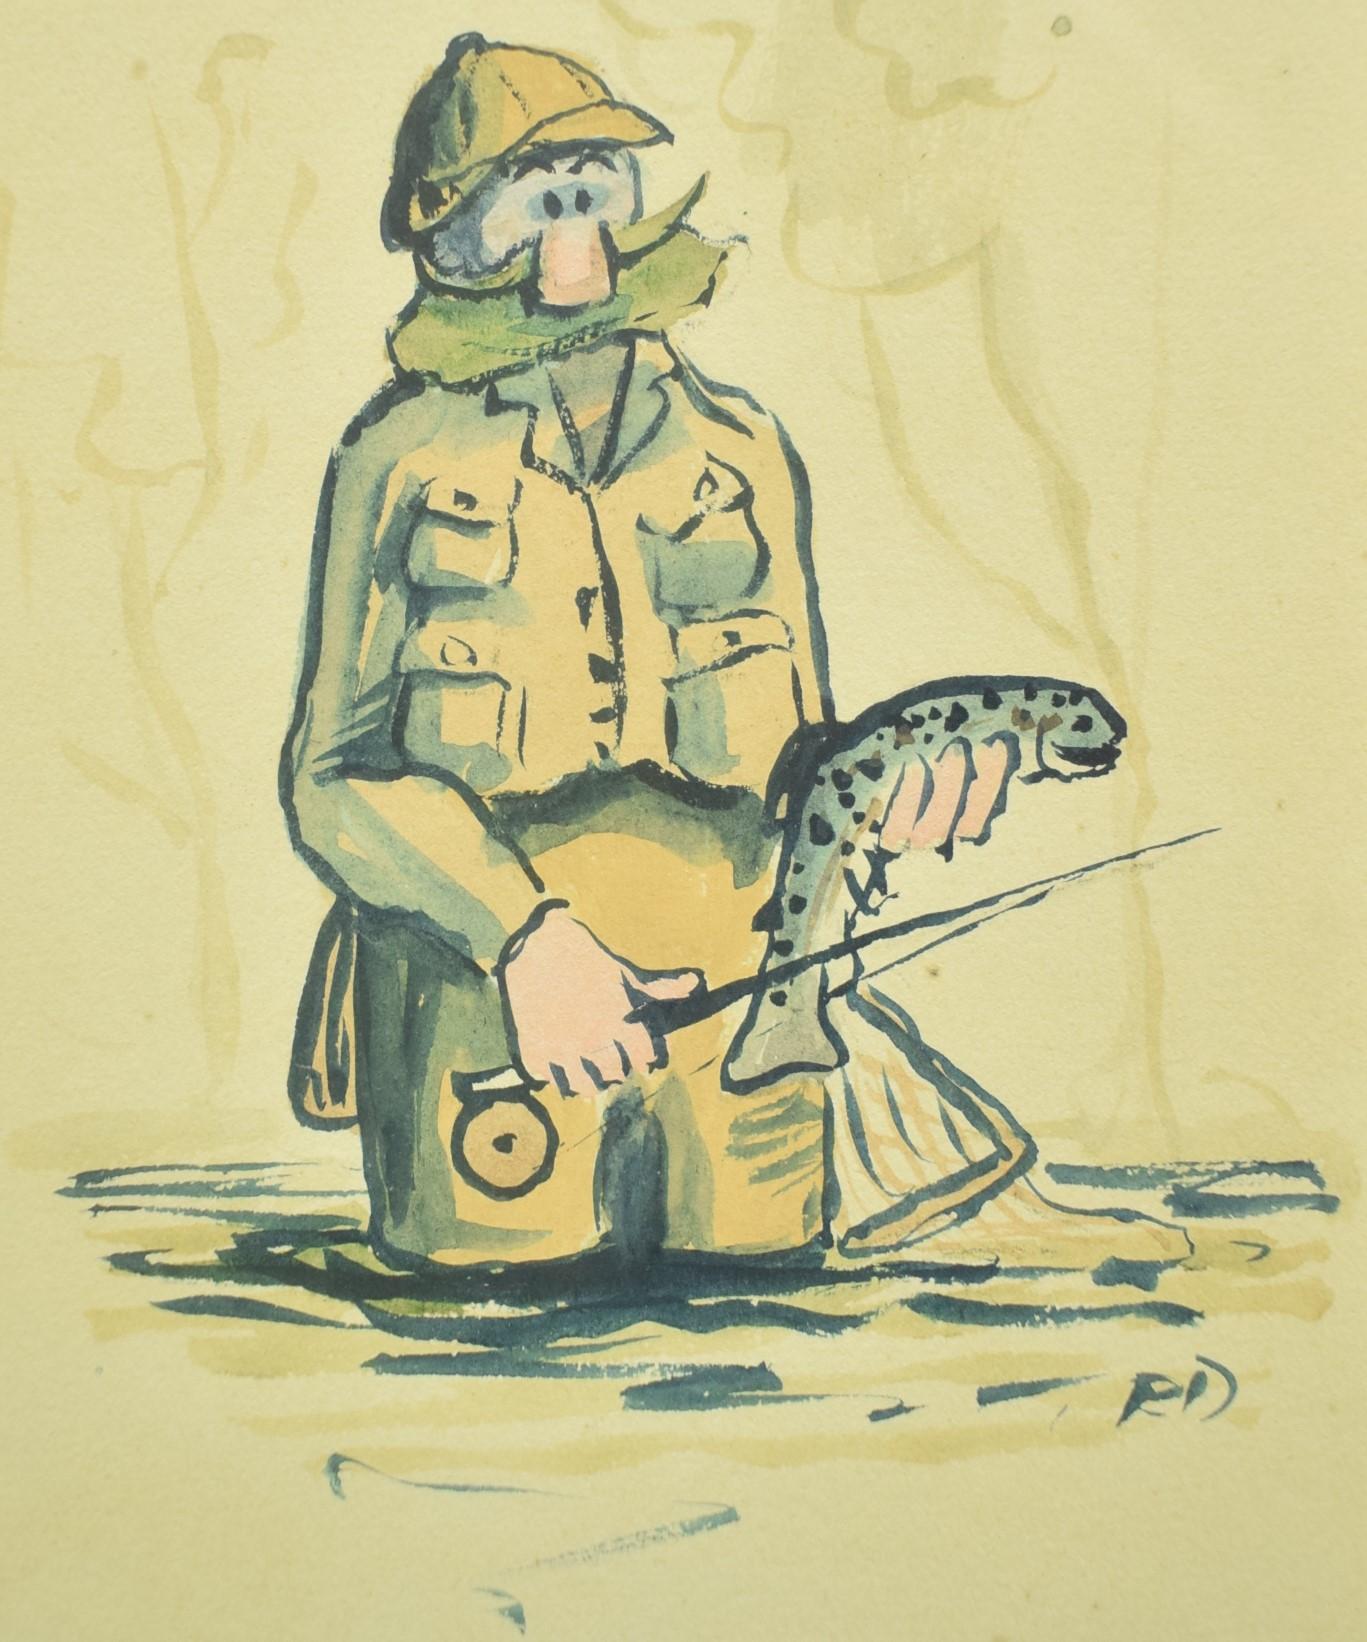 Charming circa 1960s watercolor of a trout angler

Image Sz: 5 5/8